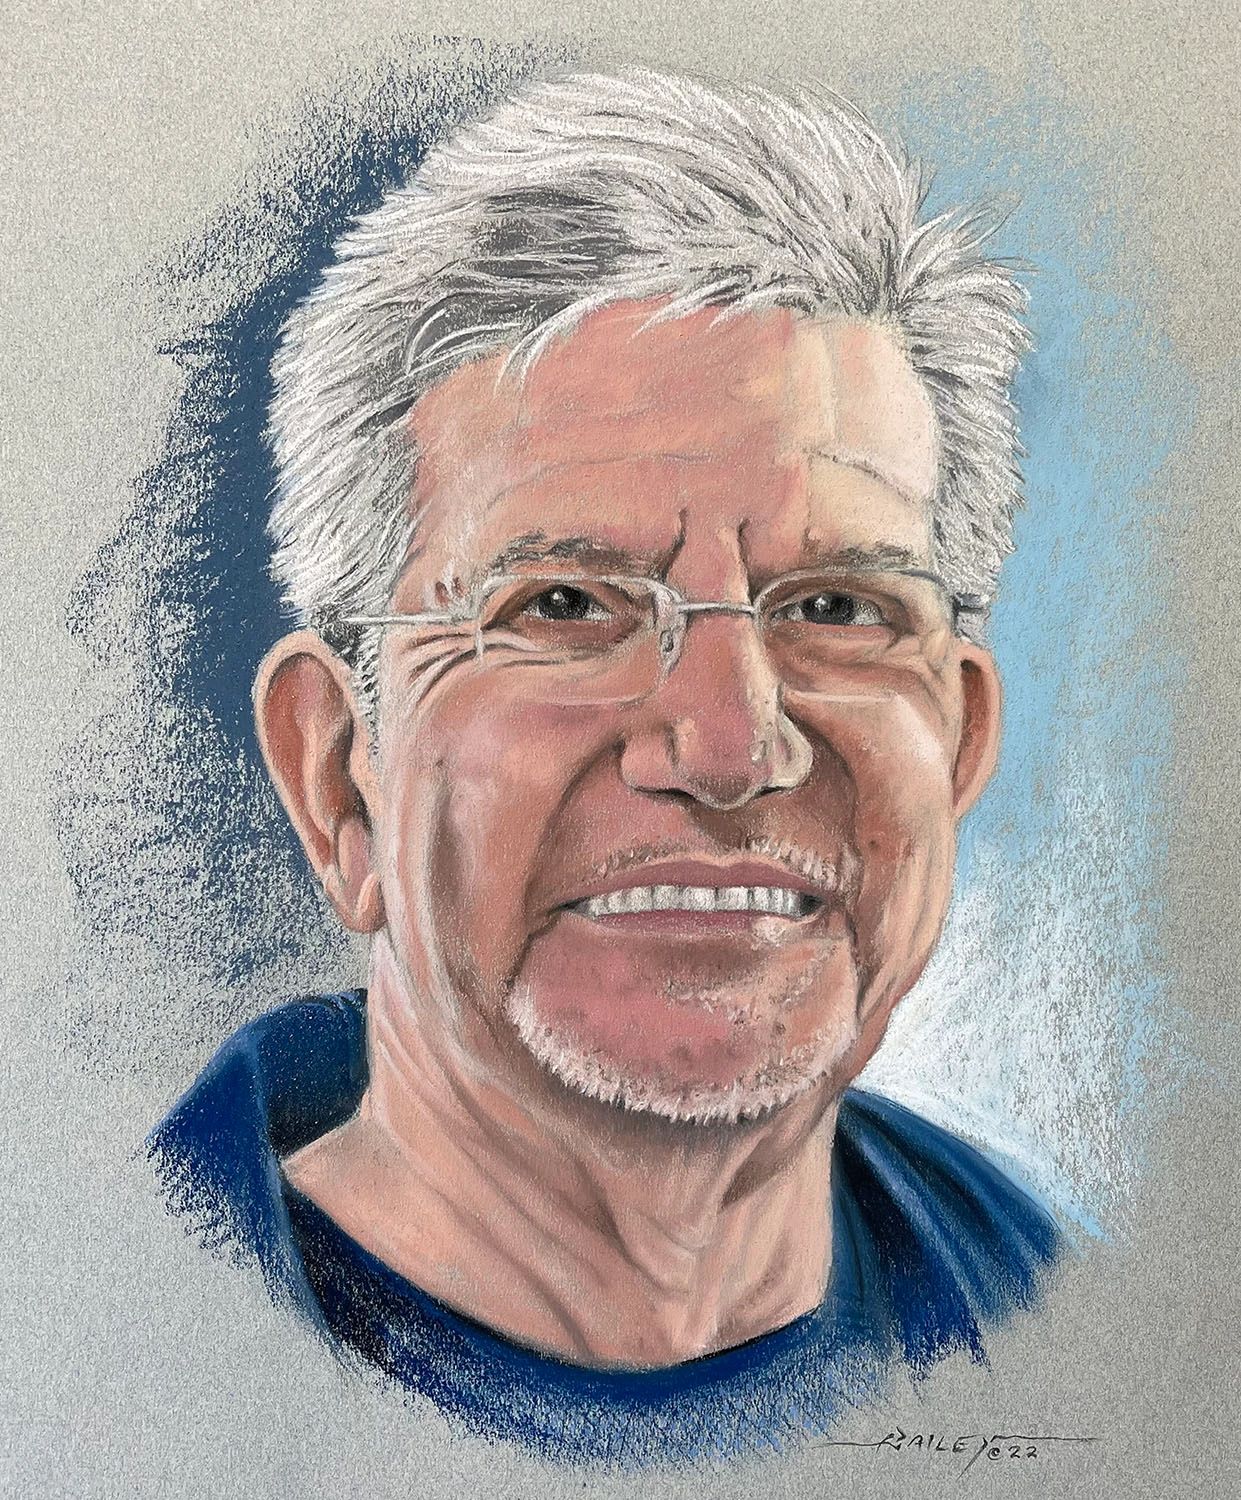 Chalk pastel portrait of a man with glasses smiling.